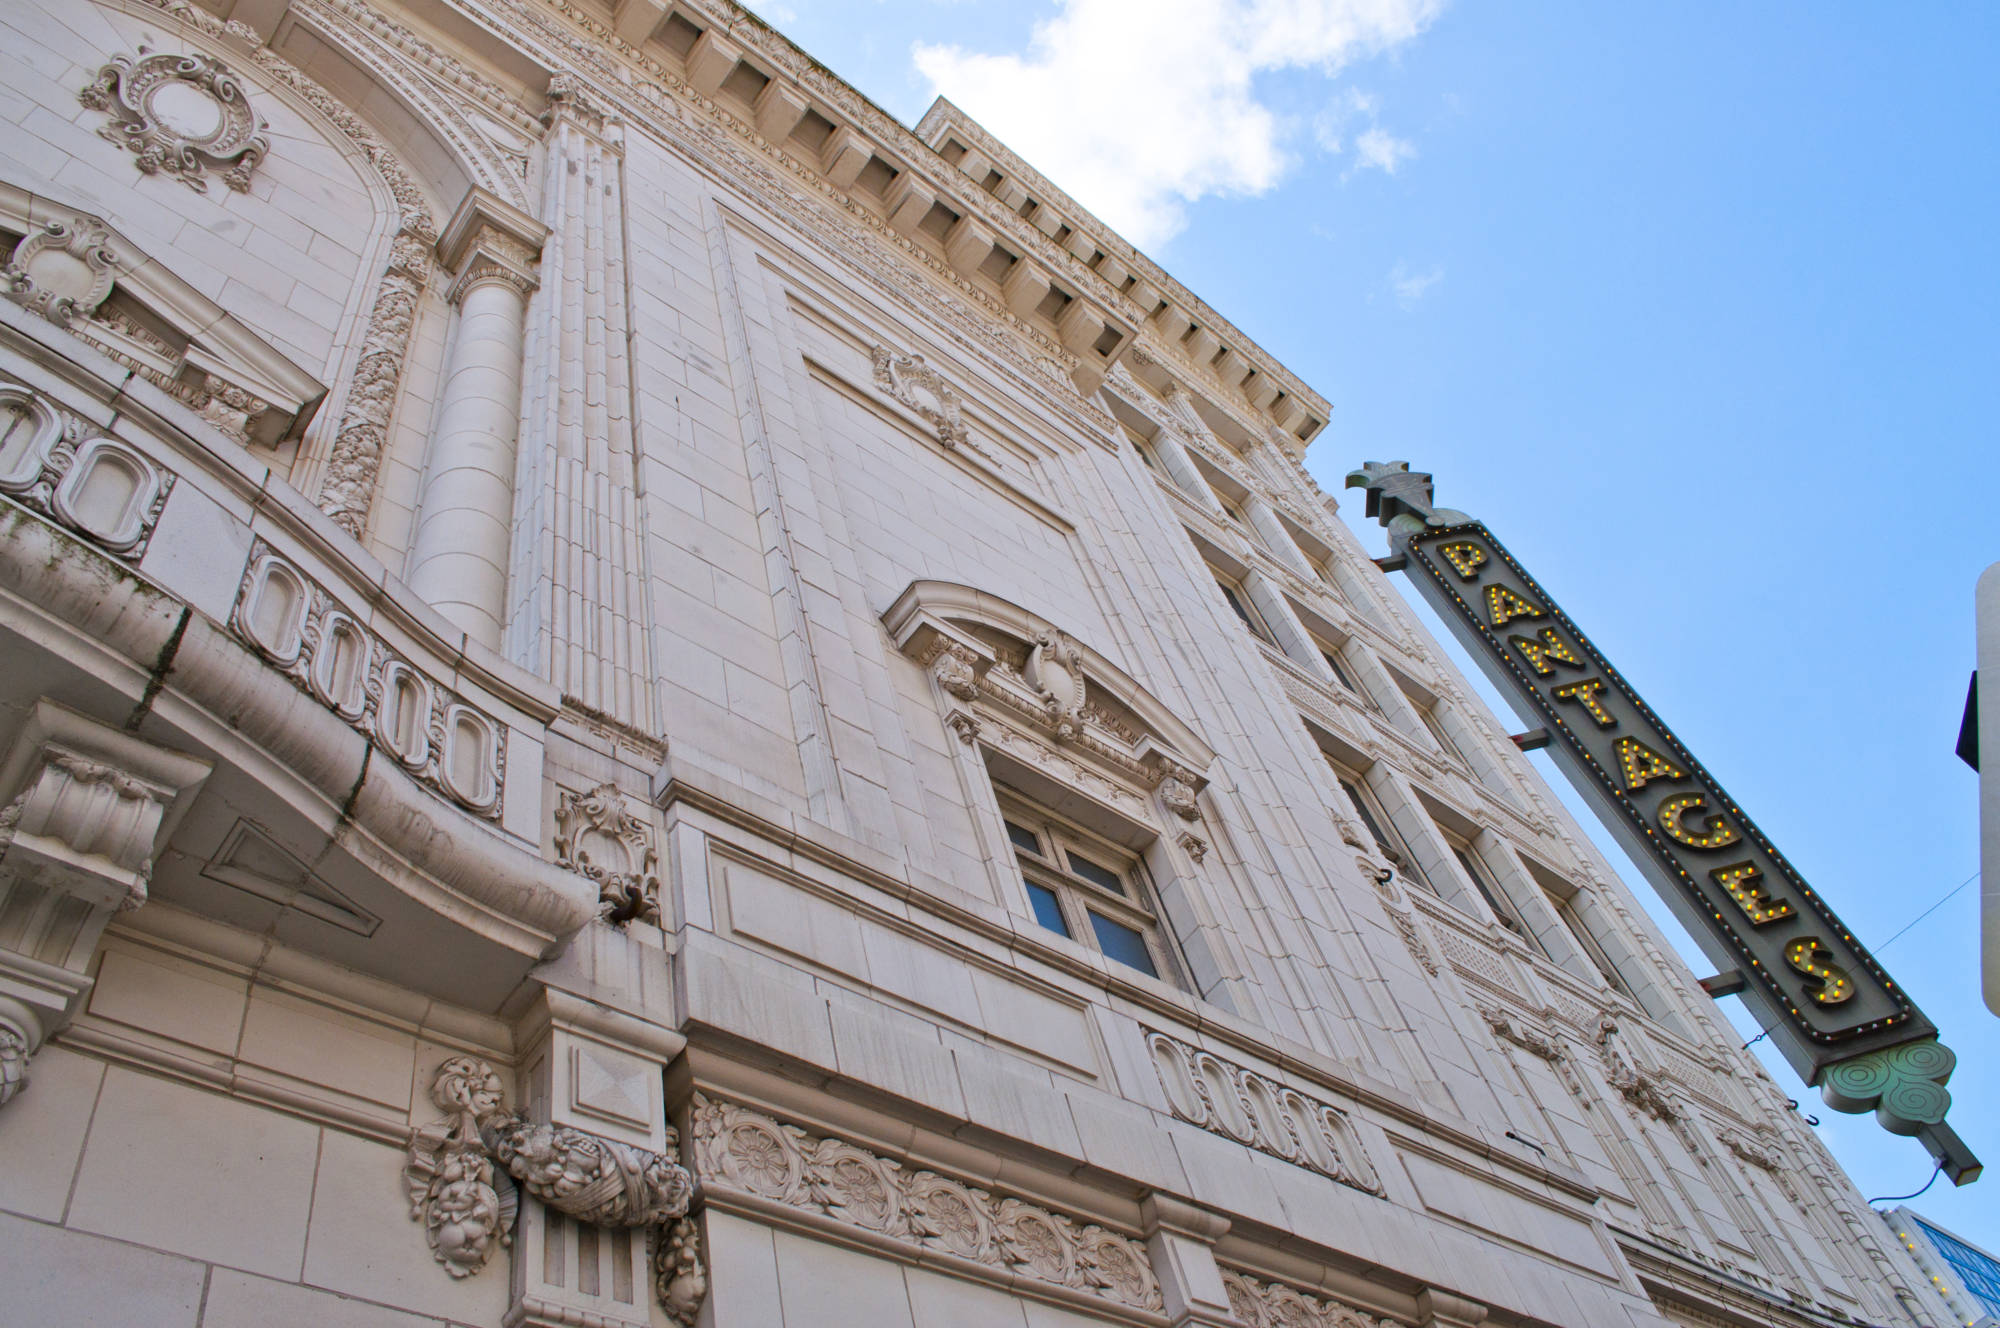 Photo of exterior architecture of Pantages Theater in downtown Tacoma, Washington.